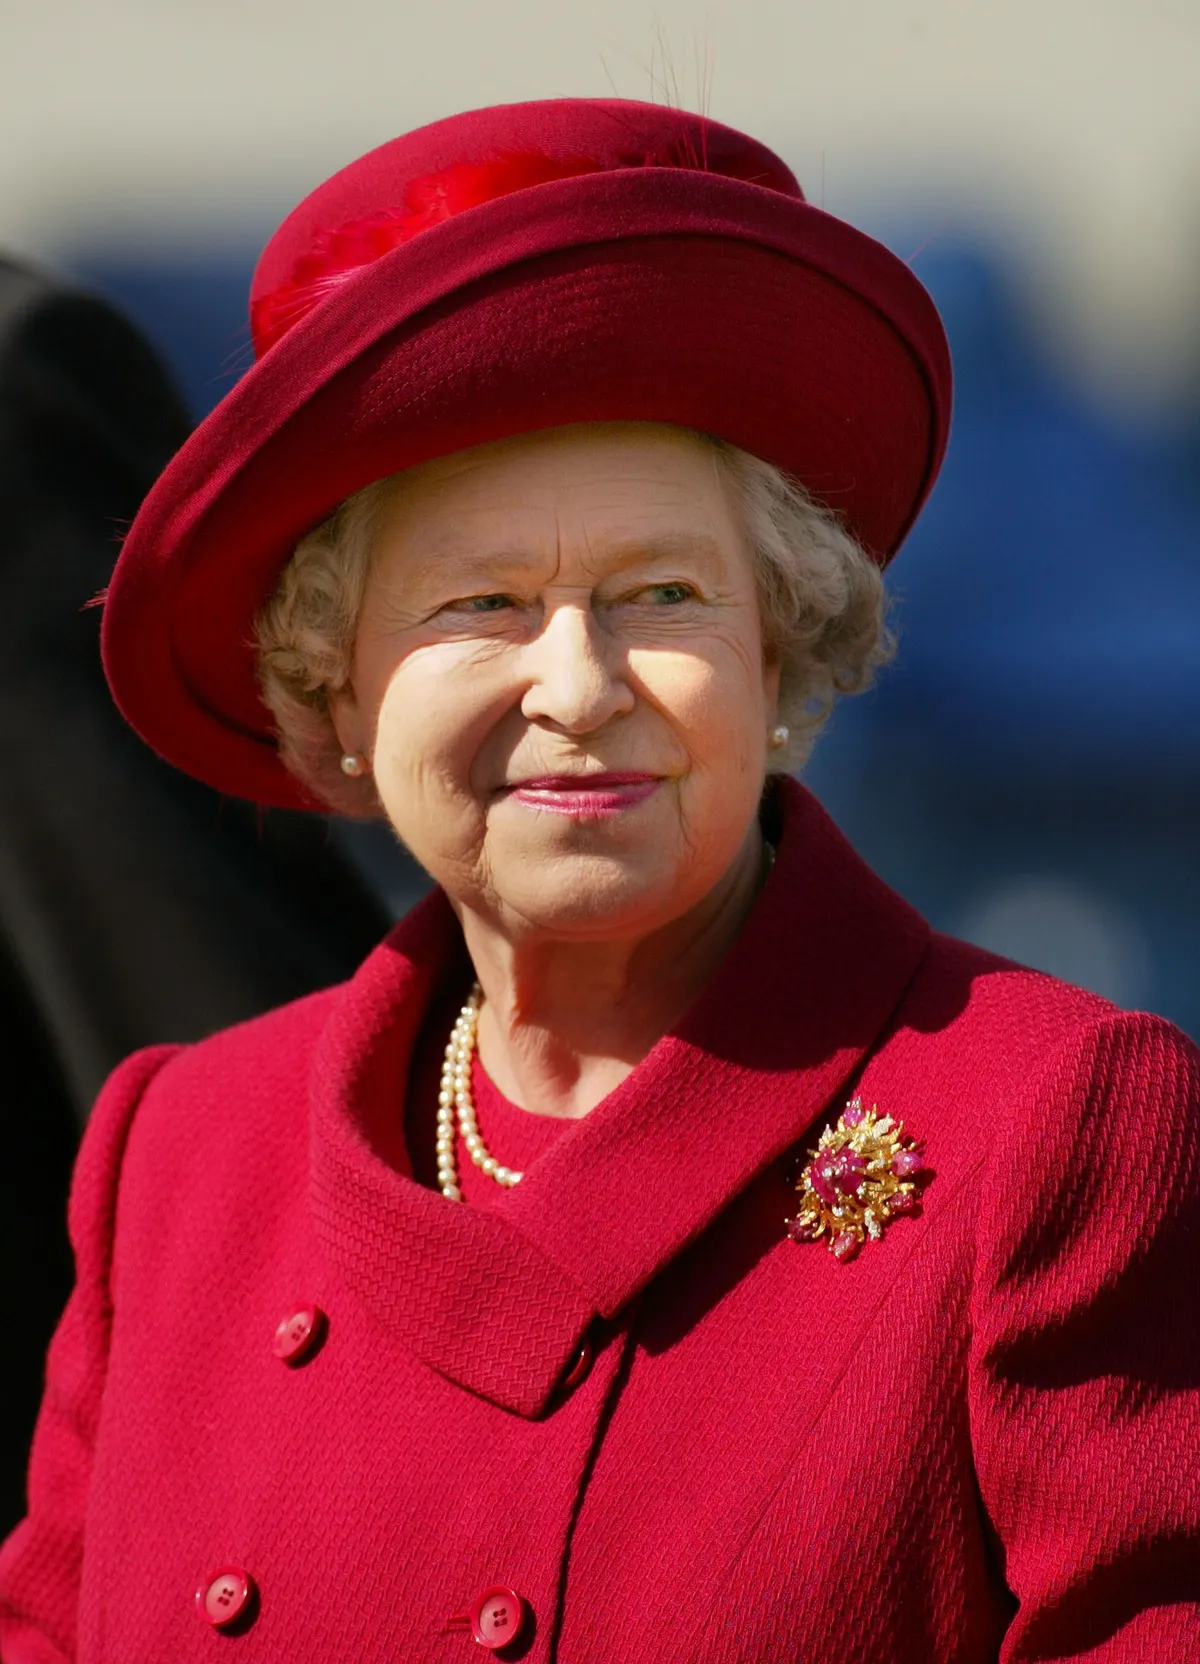 Queen Elizabeth at The Royal Windsor Horse Show at Windsor, Great Park, England on May 18, 2002. | Photo: Getty Images